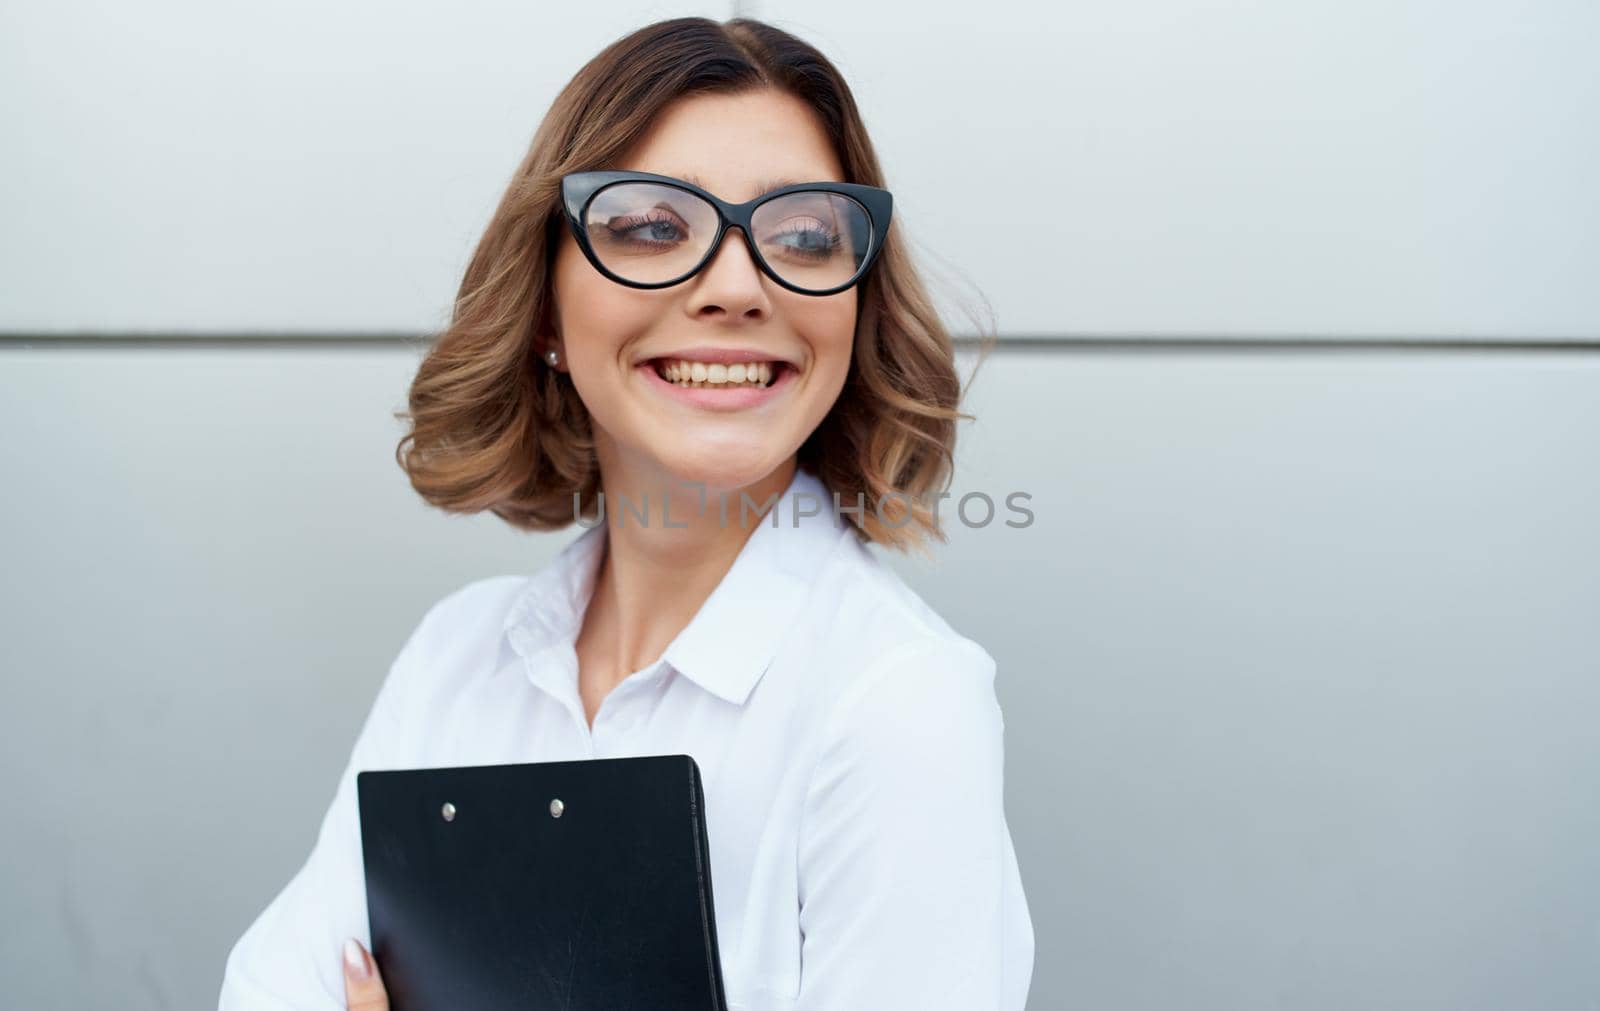 happy businesswoman near building with documents in hands and glasses on face cropped view. High quality photo